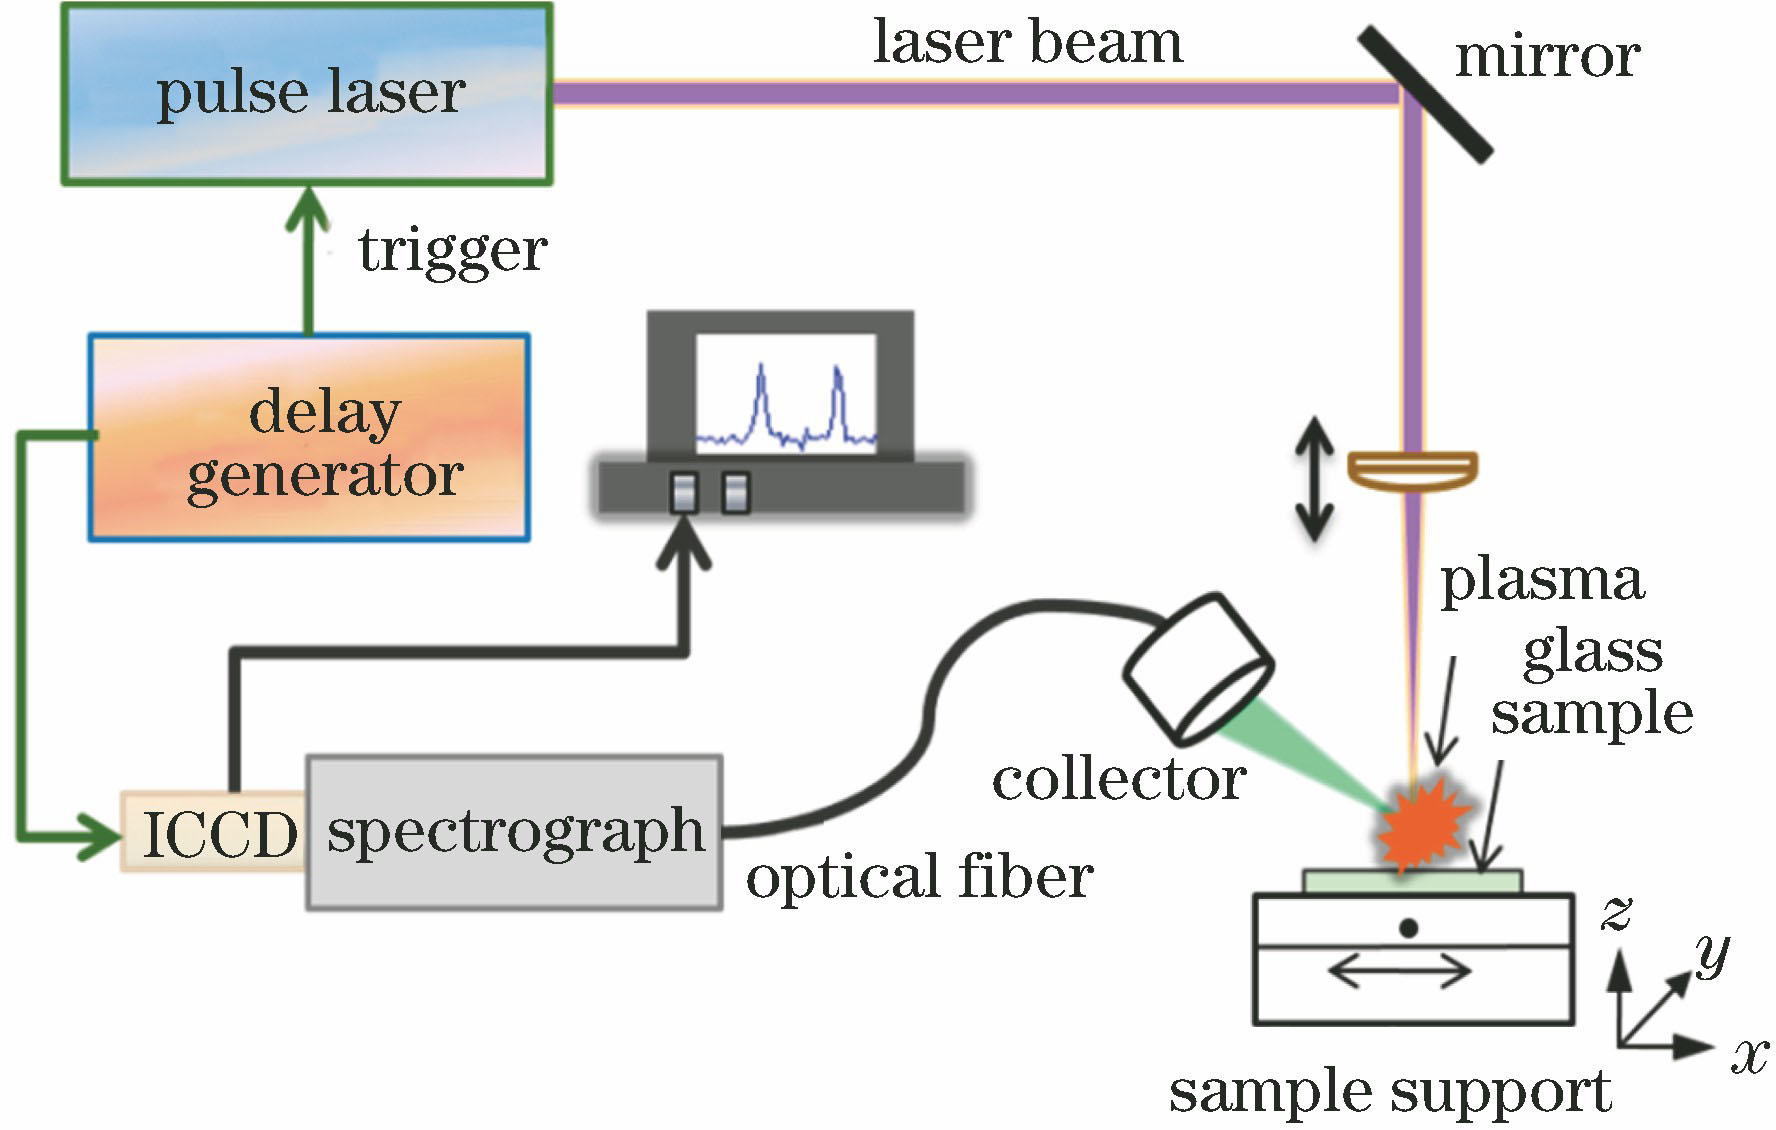 Experimental setup schematic of laser-induced breakdown glass sample